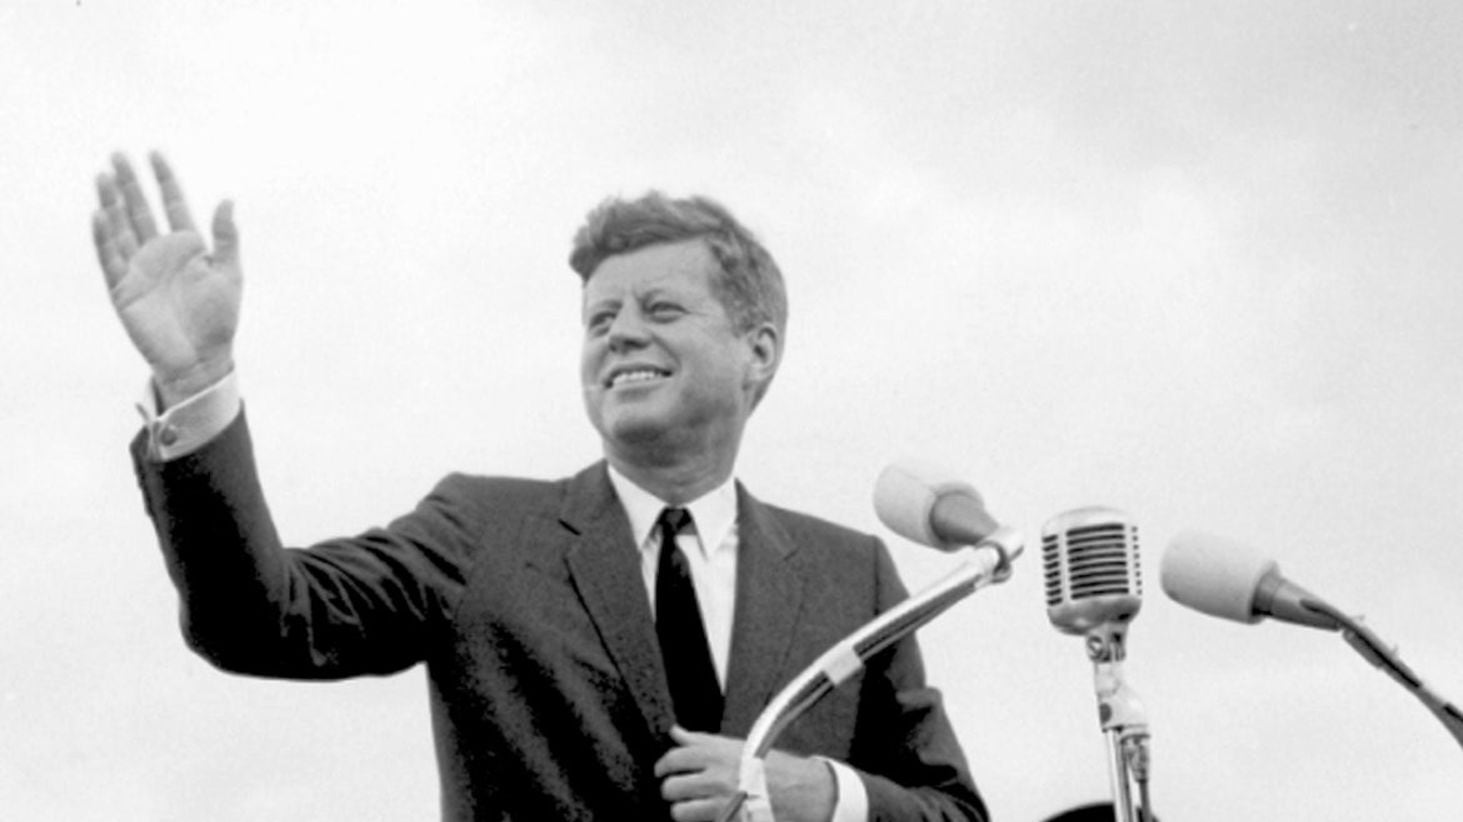 US President John F. Kennedy acknowledging the cheers of the crowd when he visits New Ross Co. Wexford. Photo: PA Wire